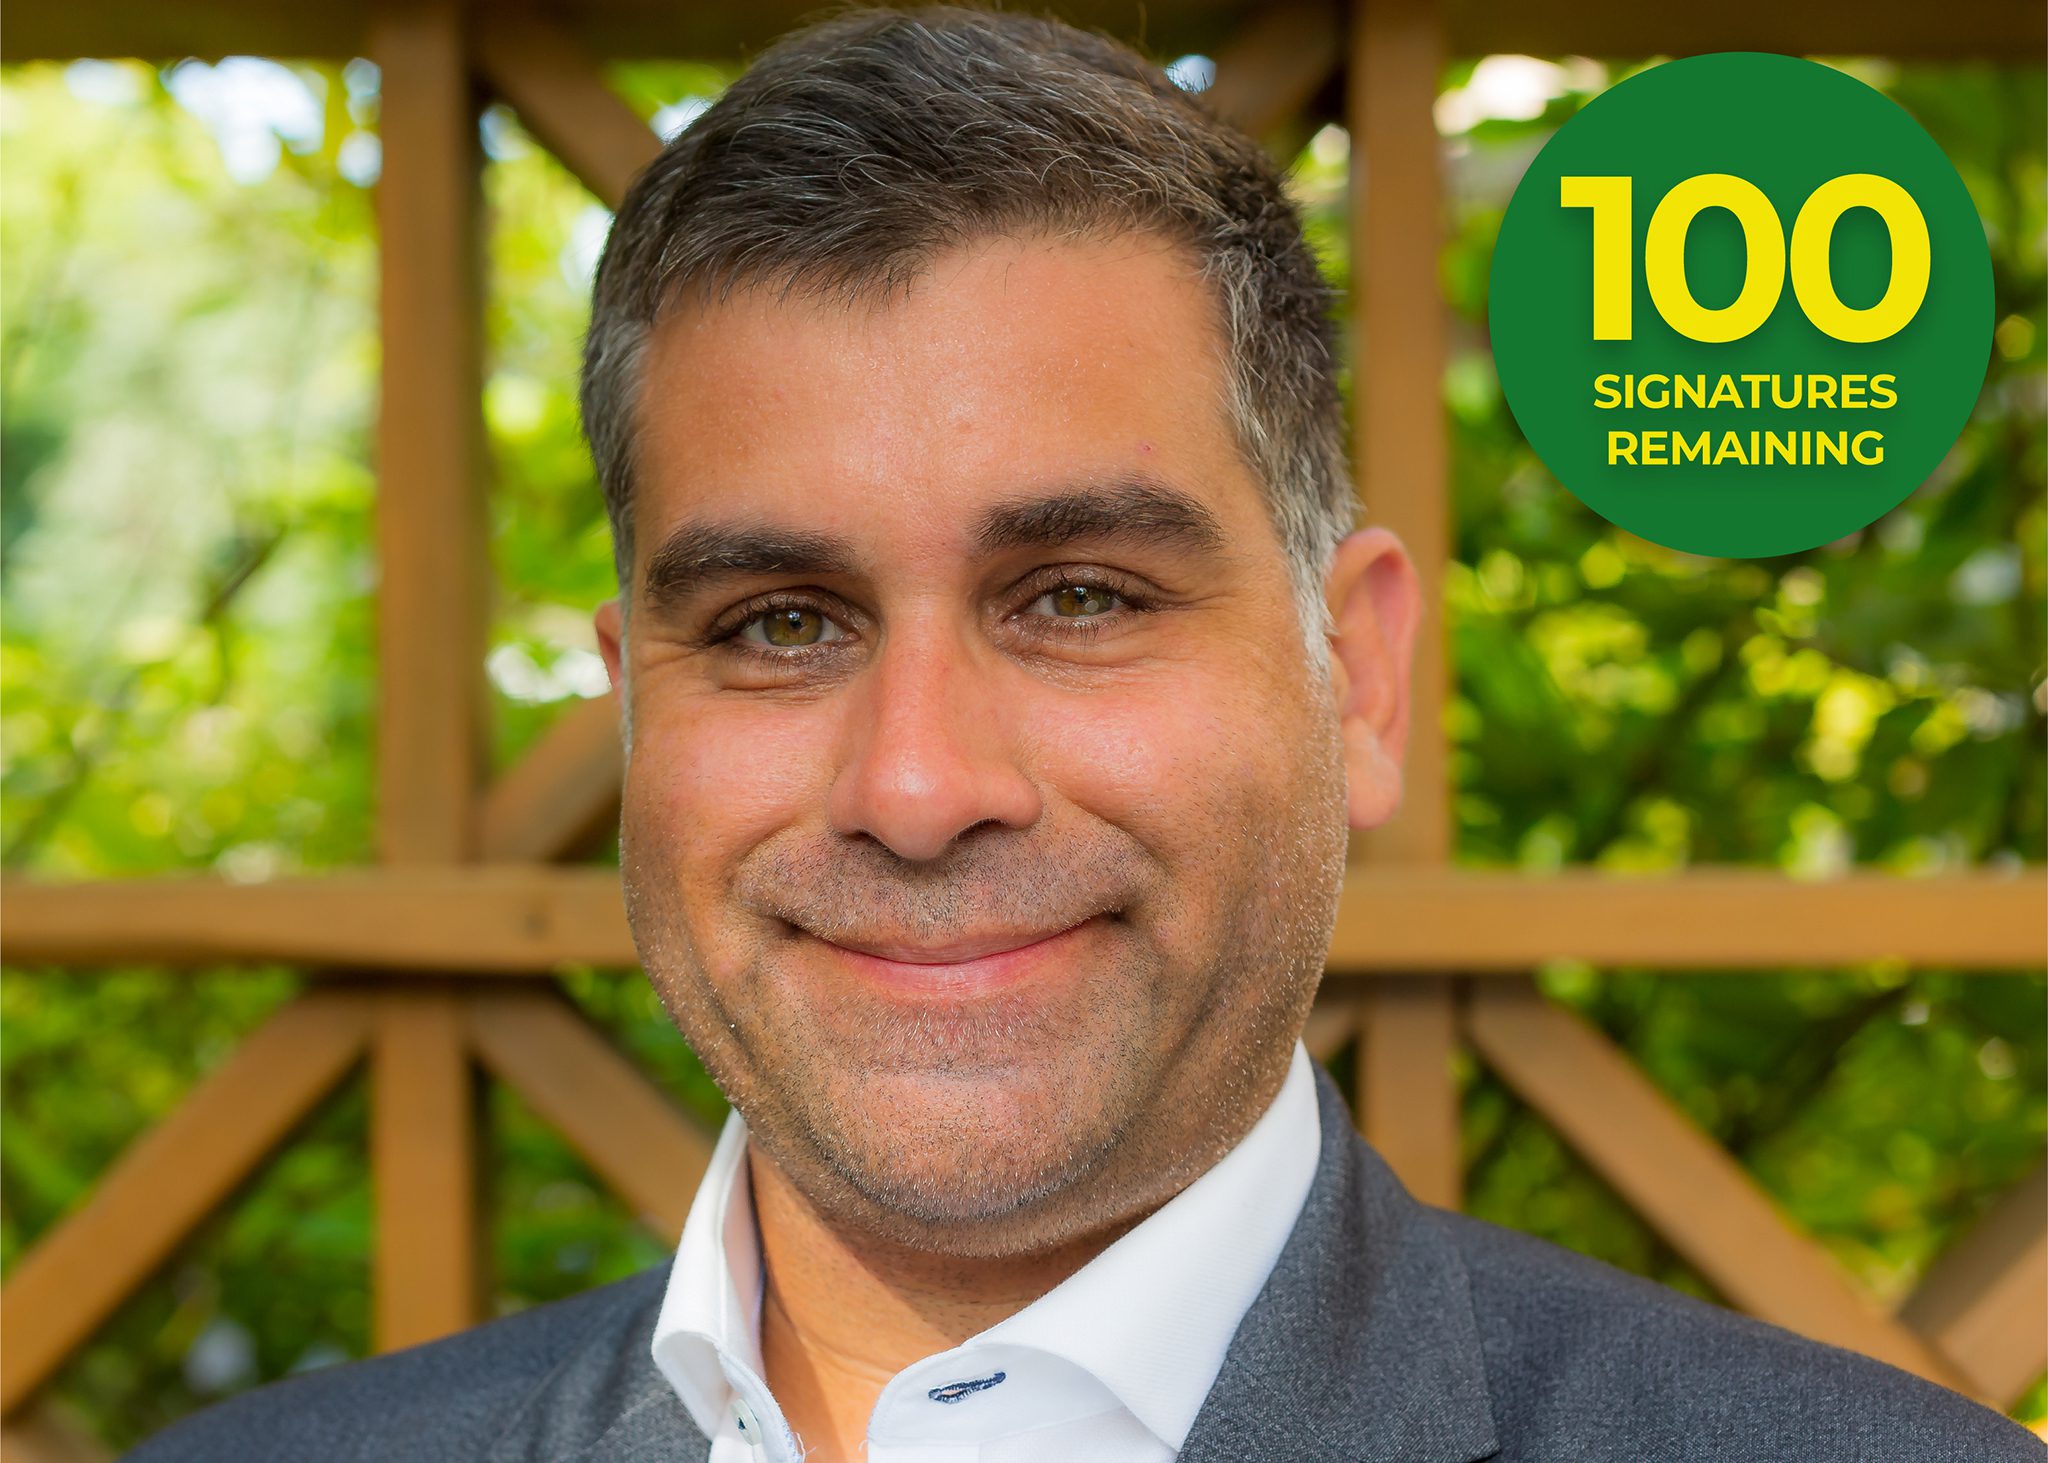 Bruno Sous 2021 Green Party Candidate - 100 Signatures Remaining